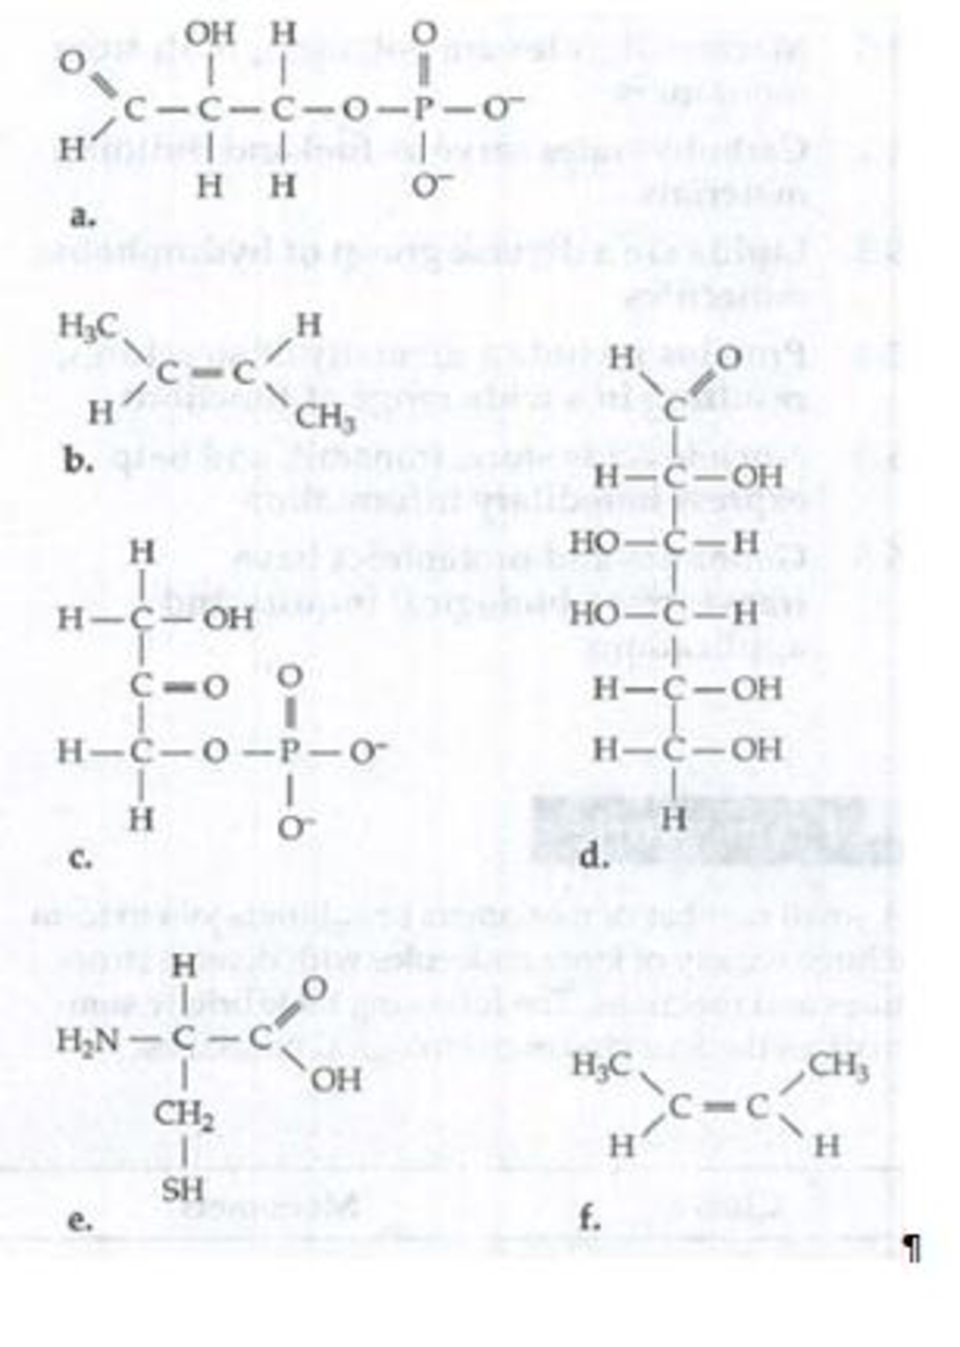 Chapter 4, Problem 3TYKM, can have enantiomers 